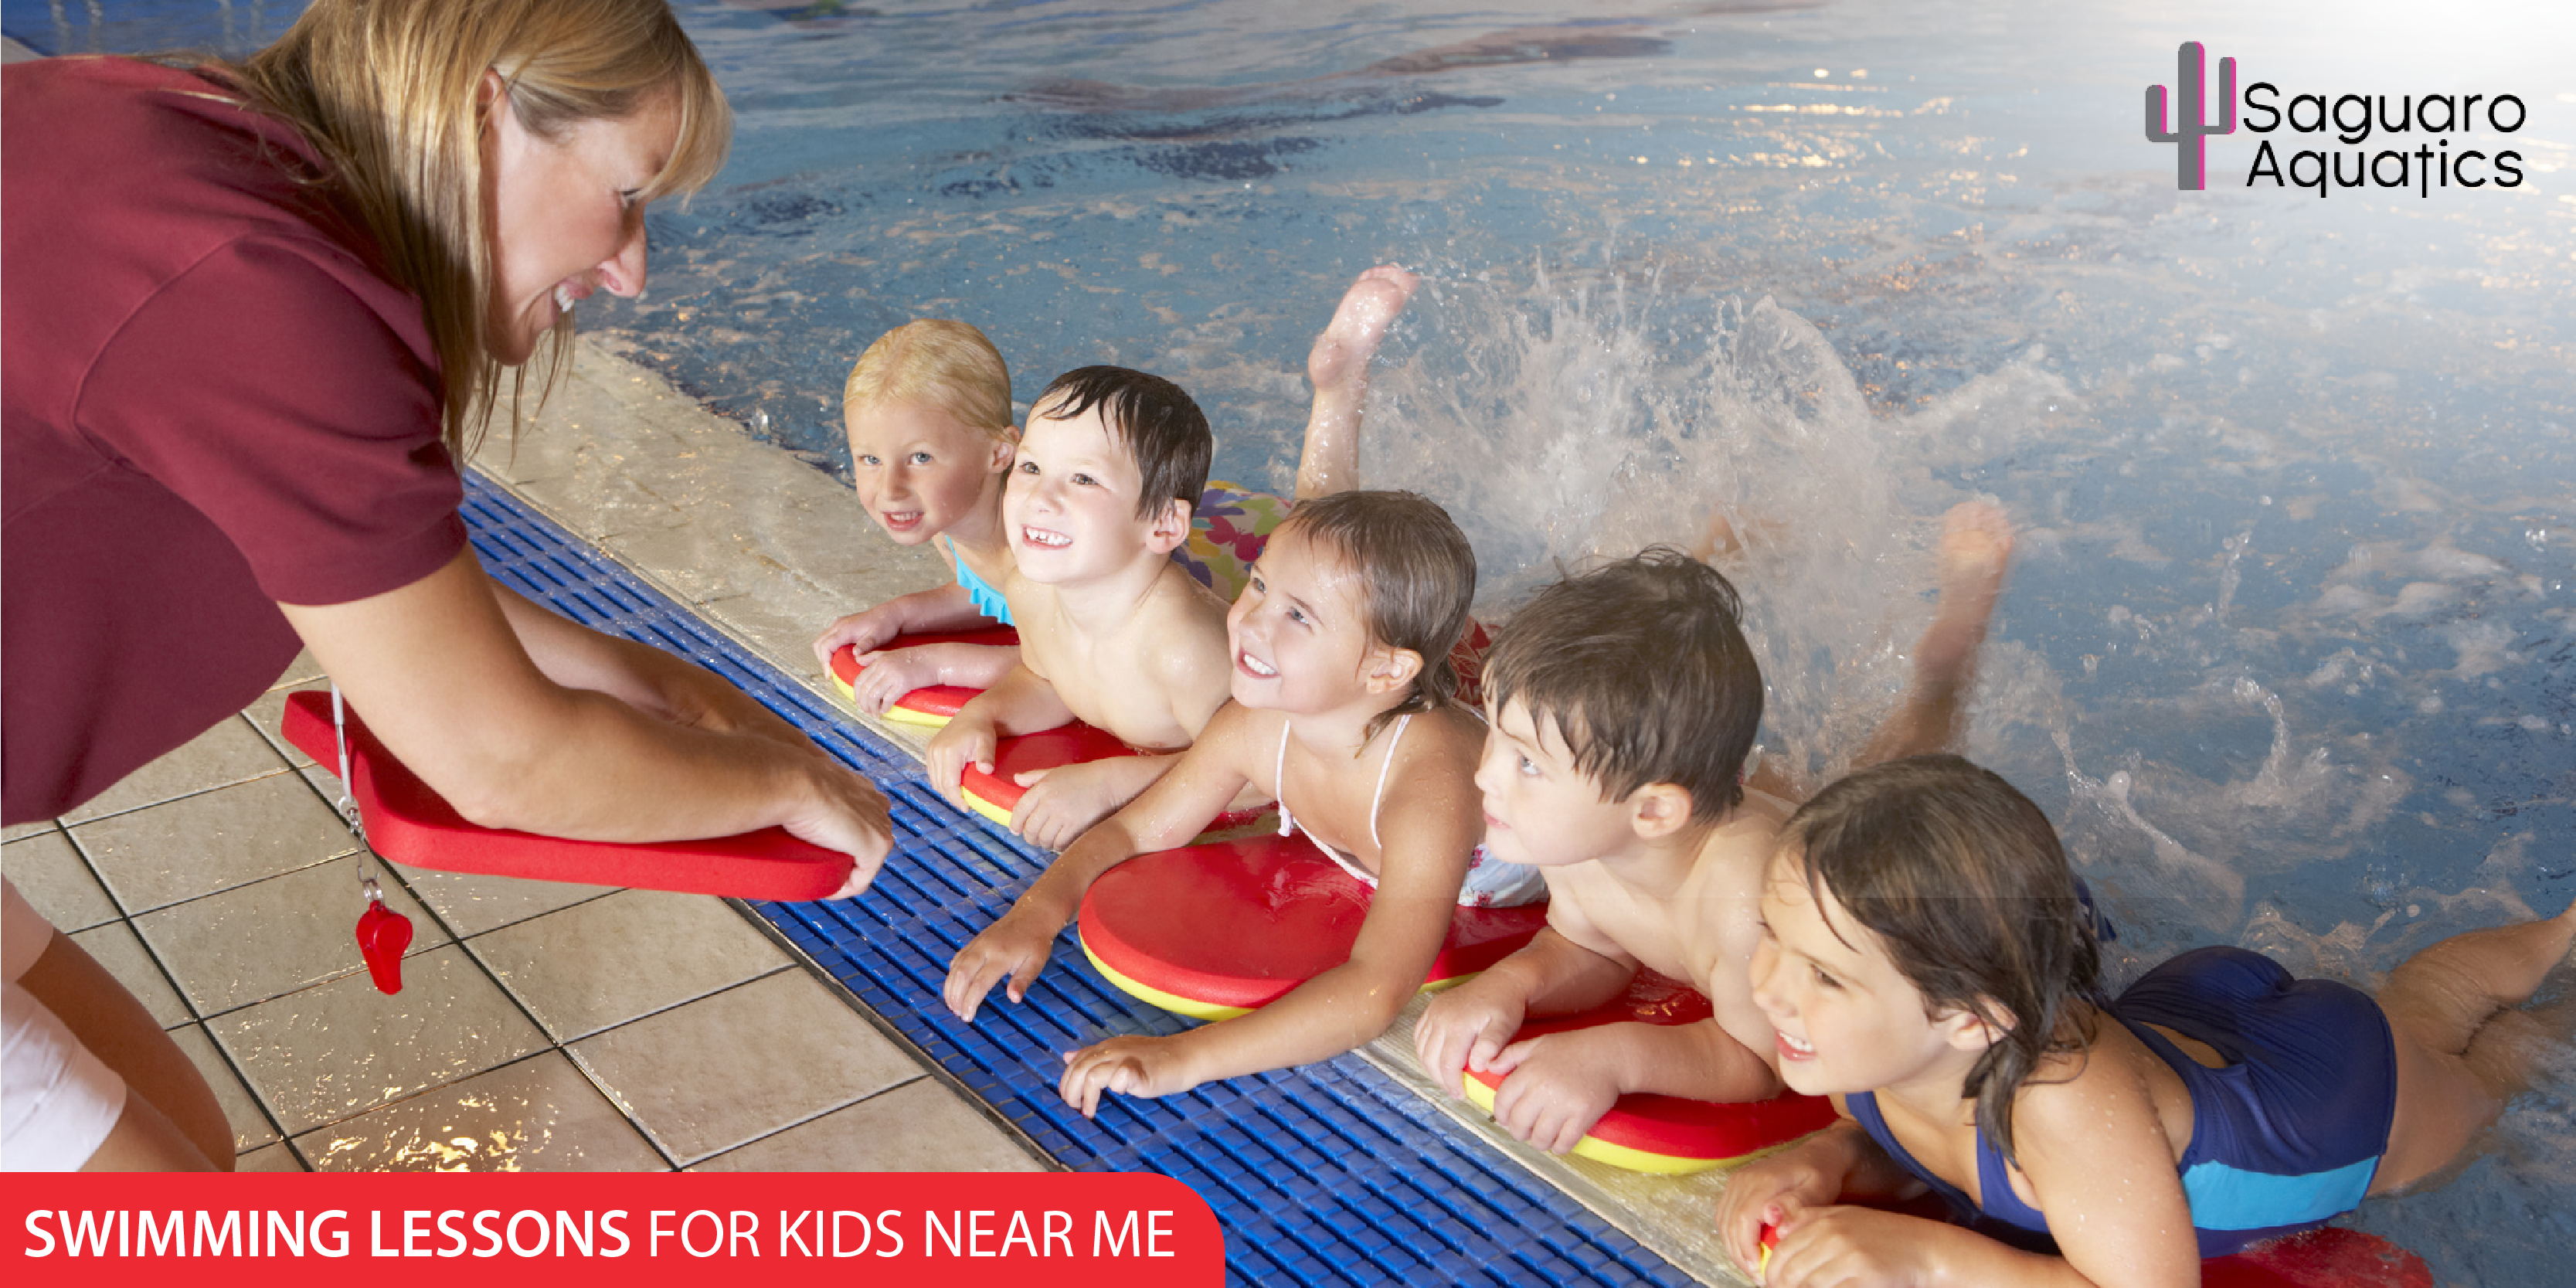 The 5 Benefits of Year-Round Swimming for Kids